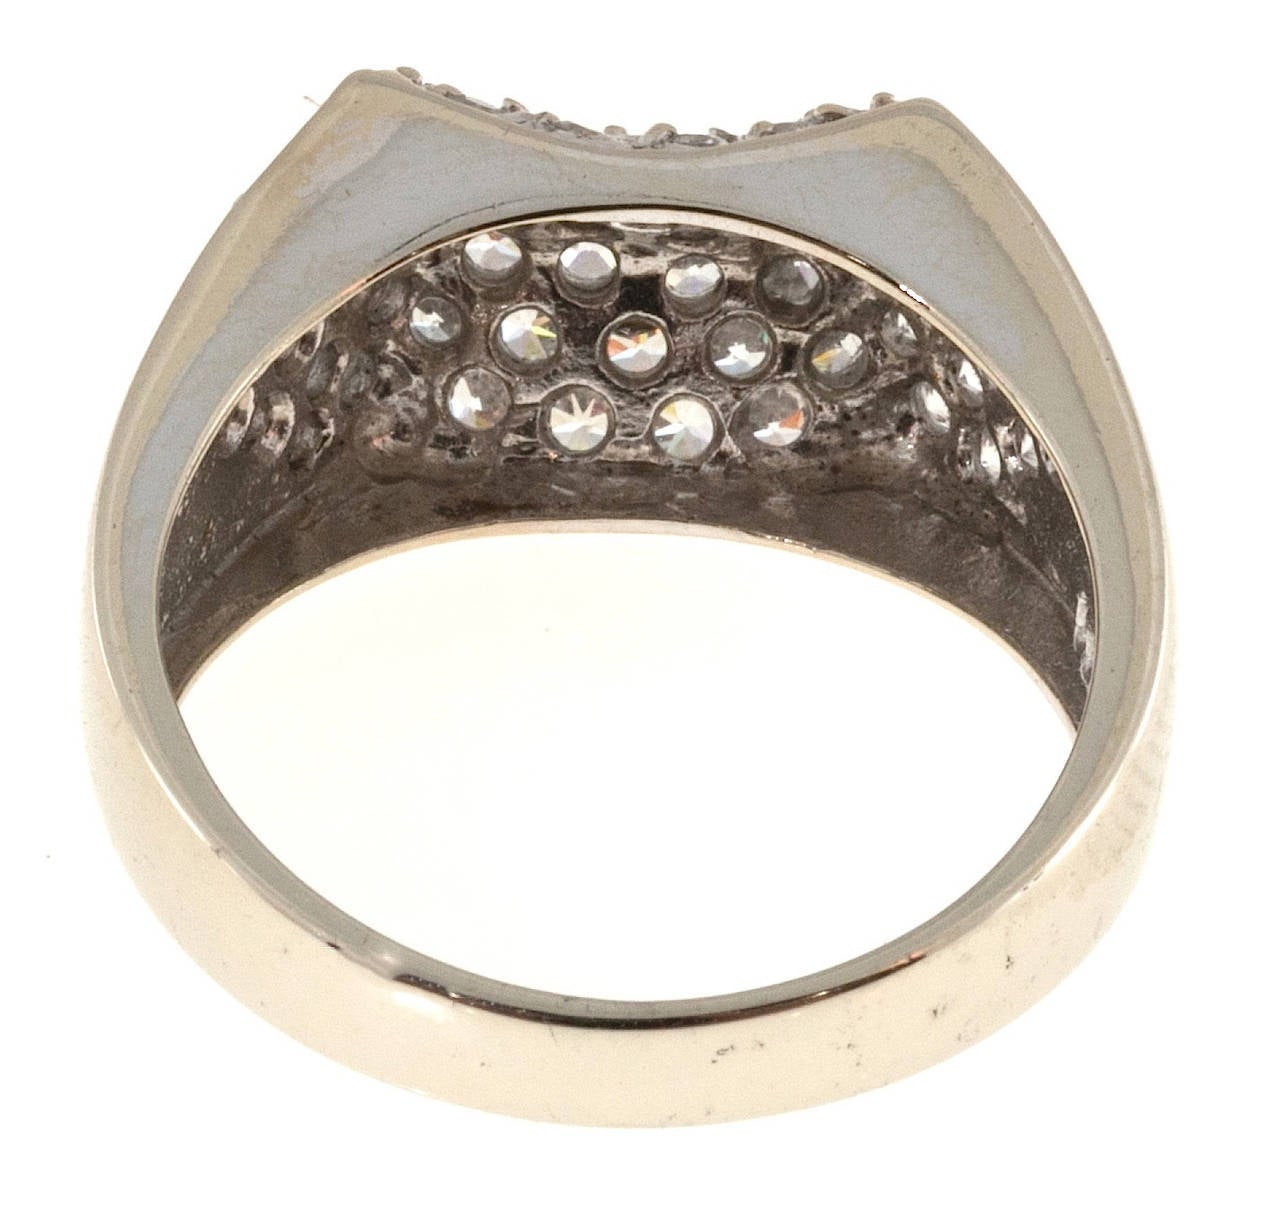 Geometrically styled 14k white gold ring pave set with 56 bright white full cut diamonds.

56 full cut diamonds, approx. total weight 1.12cts, G, SI1
14k White Gold
Stamped: 585
6.2 grams
Width at top: 10mm
Height at top: 5.5mm
Width at